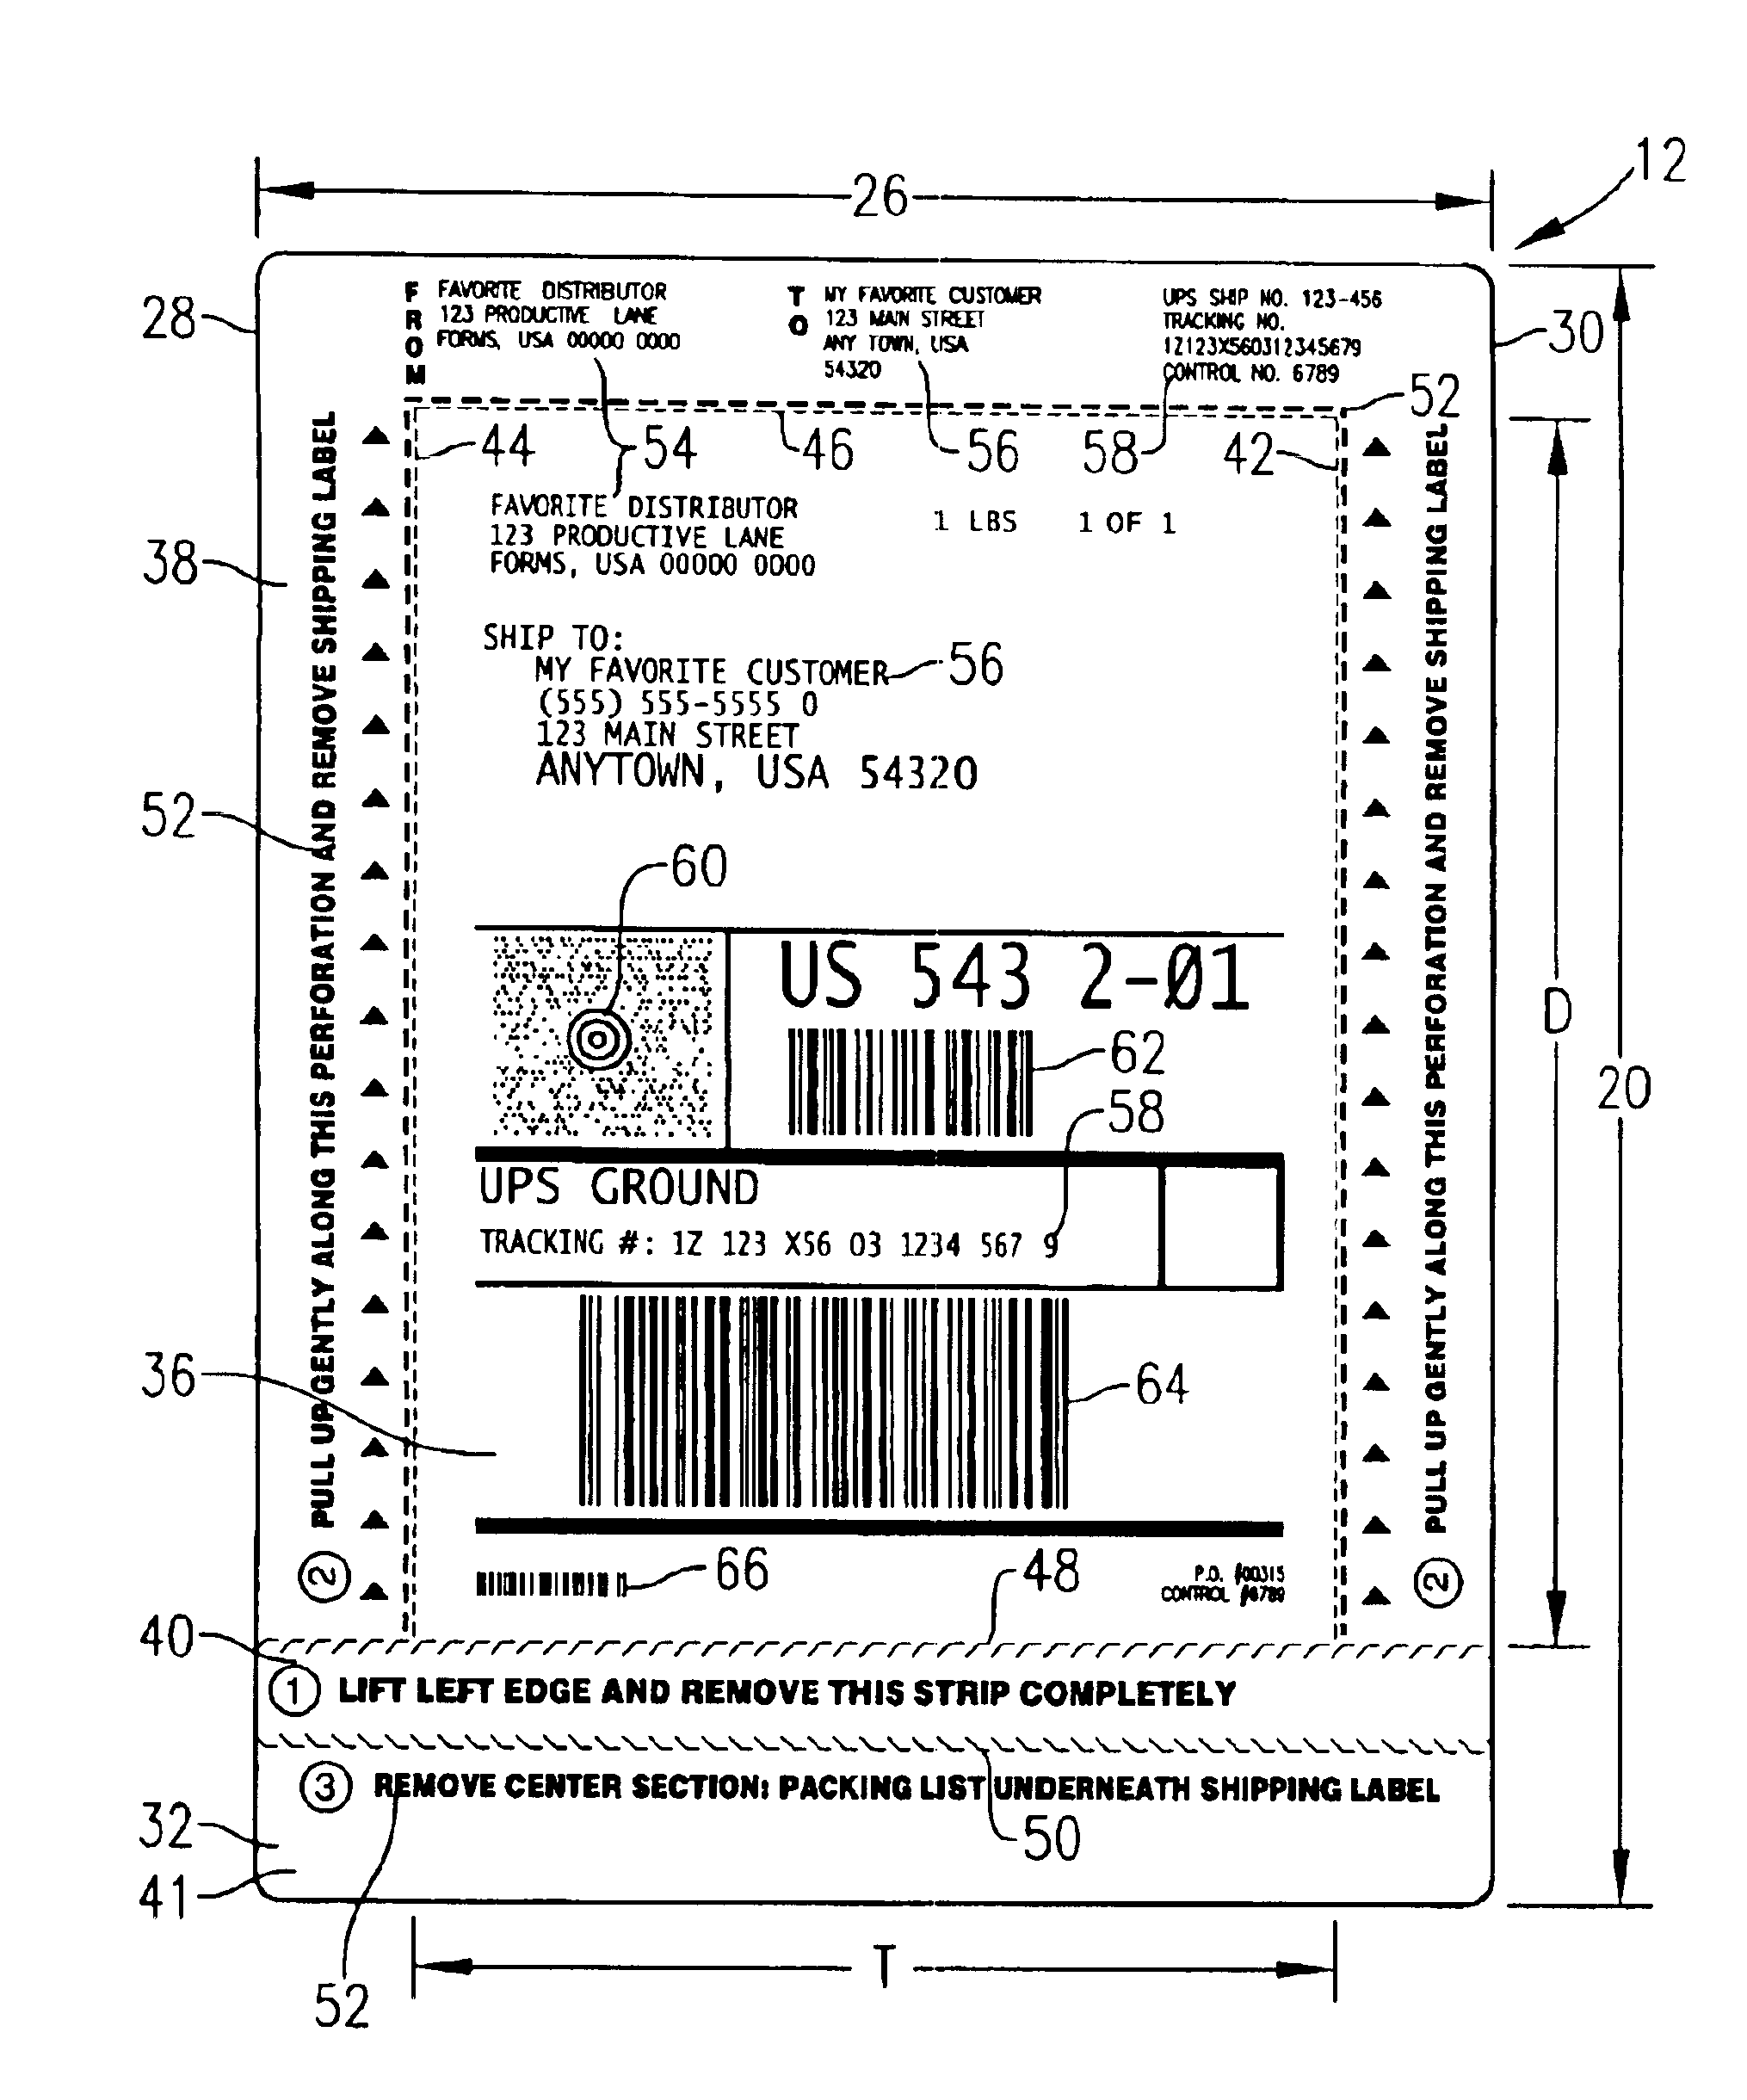 Sequentially placed shipping and packing label system